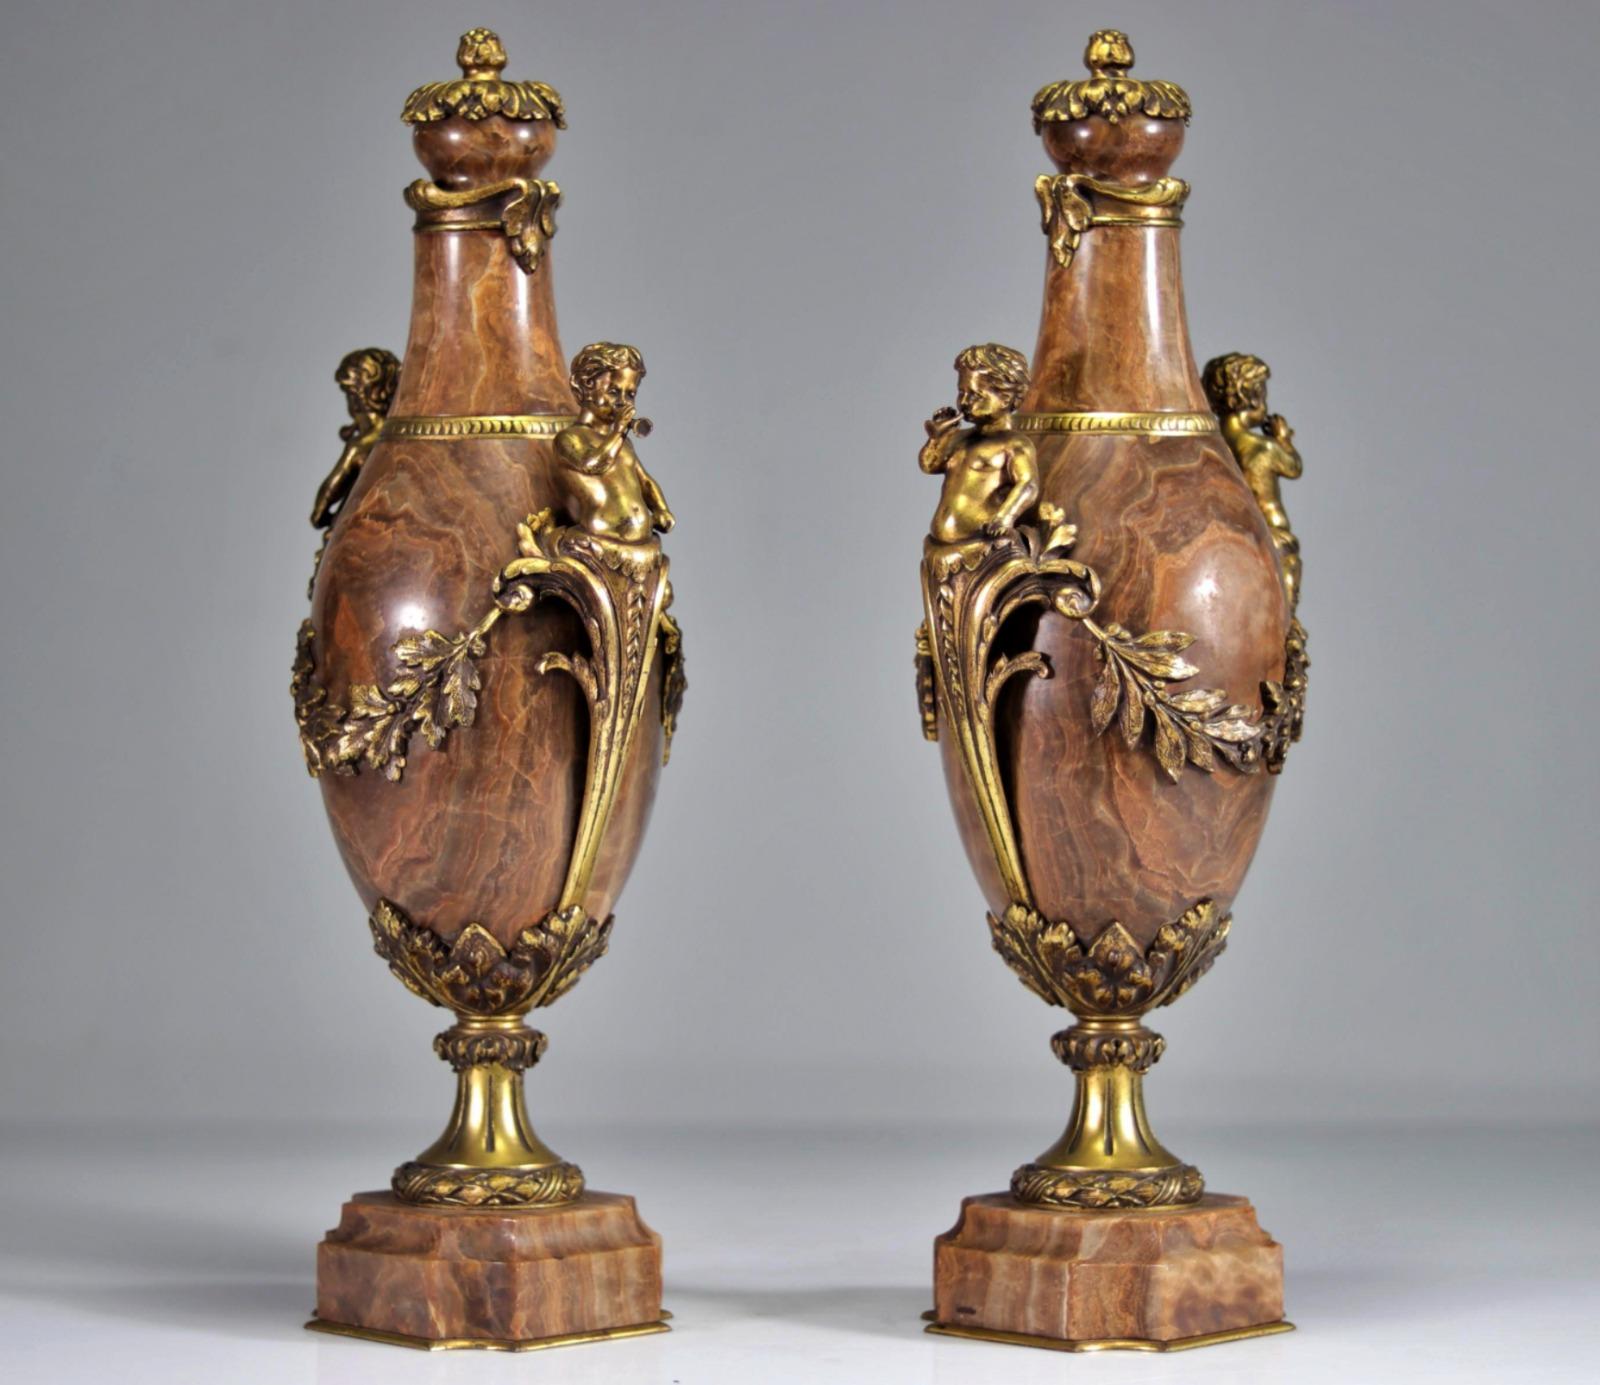 Empire Pair of Marble Vases Decorated with Gilt Bronze Musical Fauns, 19th Century